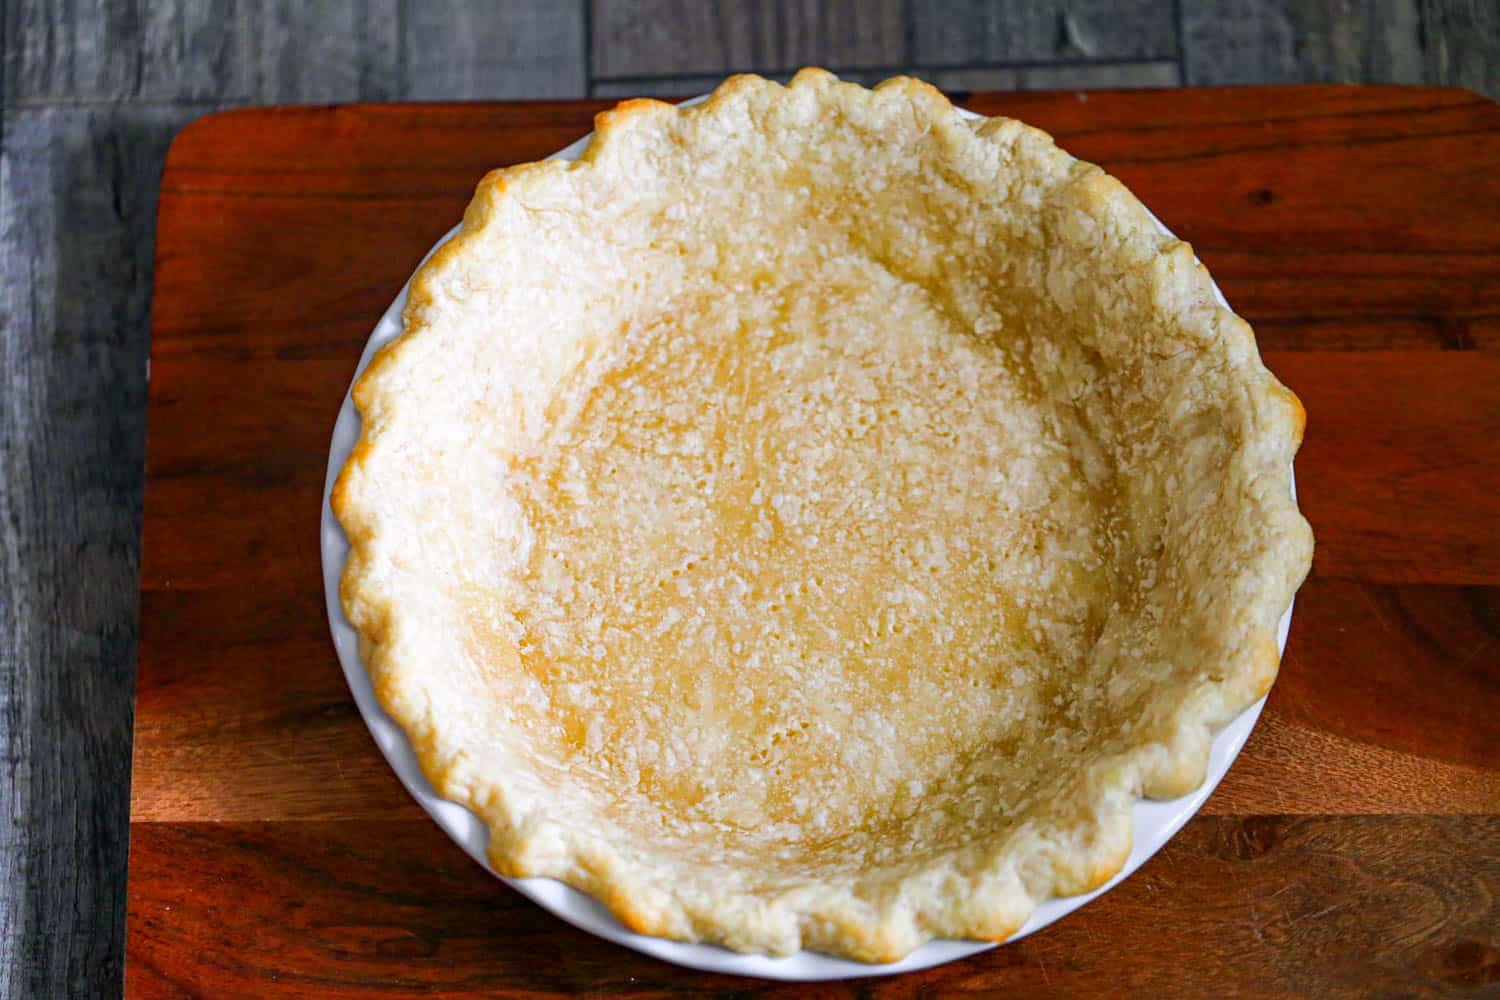 prebaked picture tutorial how to make Easy Homemade Pie Crust